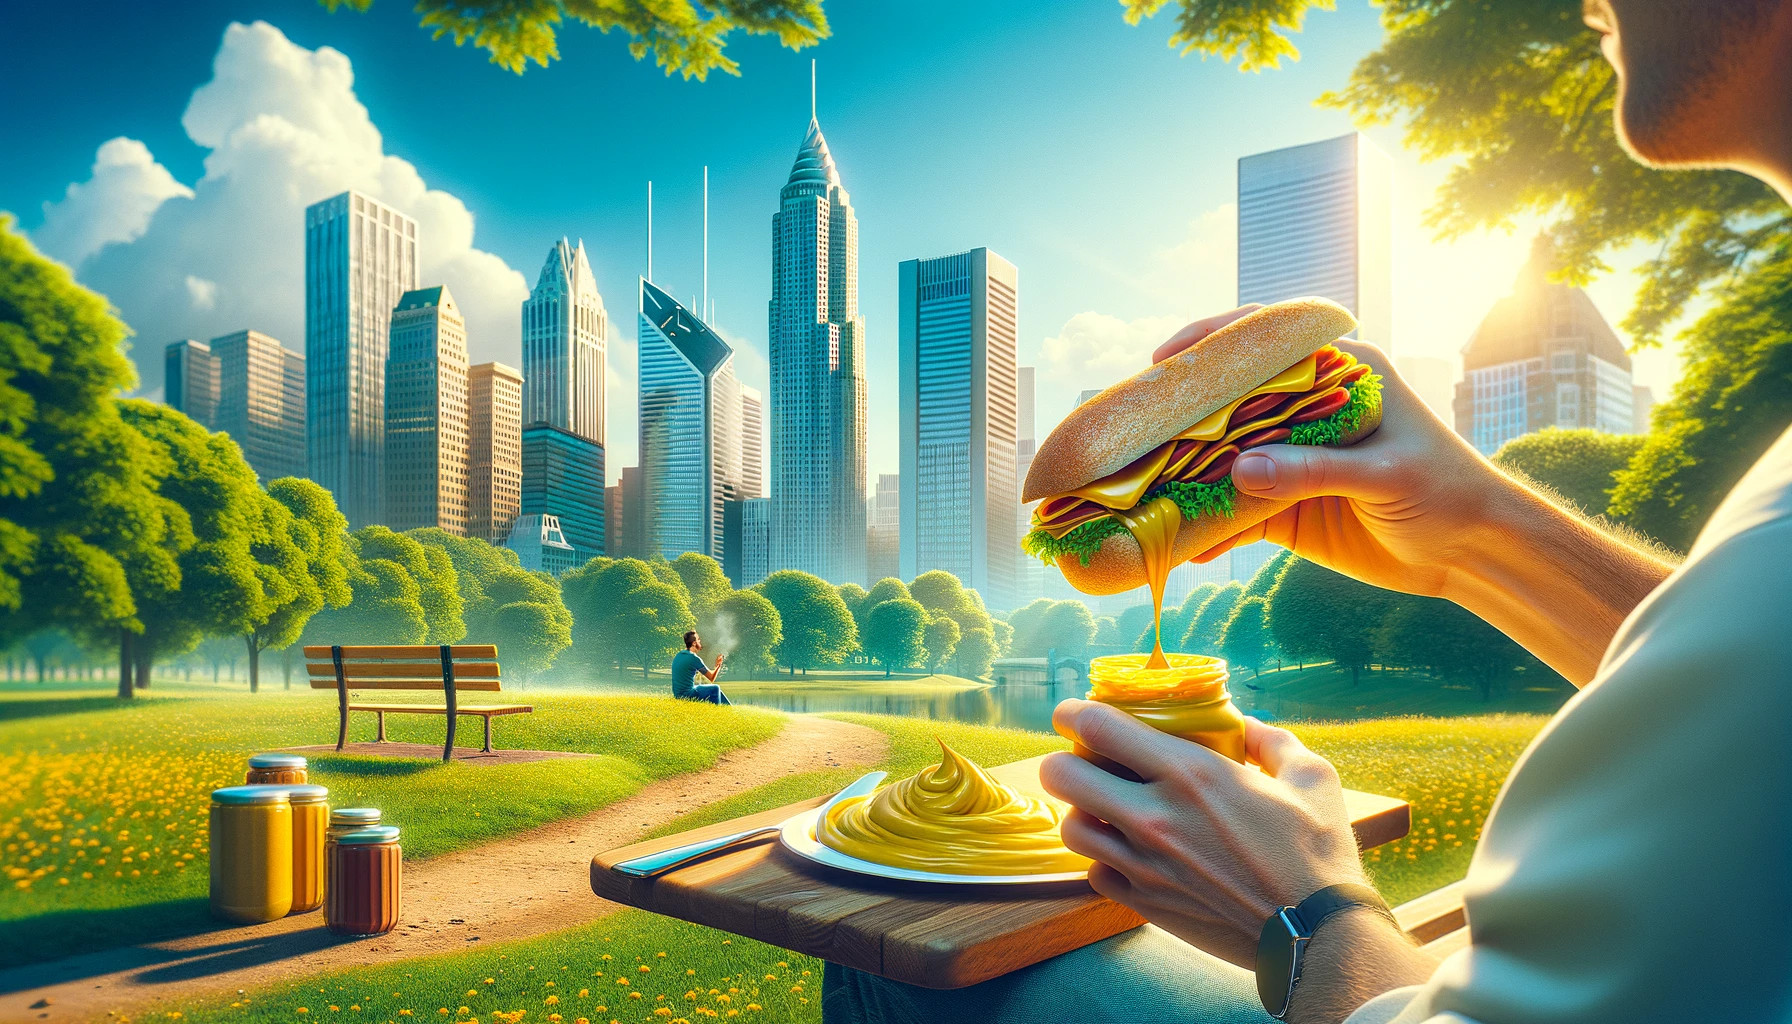 An individual enjoying a gourmet sandwich with mustard in a vibrant city park, emphasizing the pleasure of simple, flavorful meals enjoyed outdoors